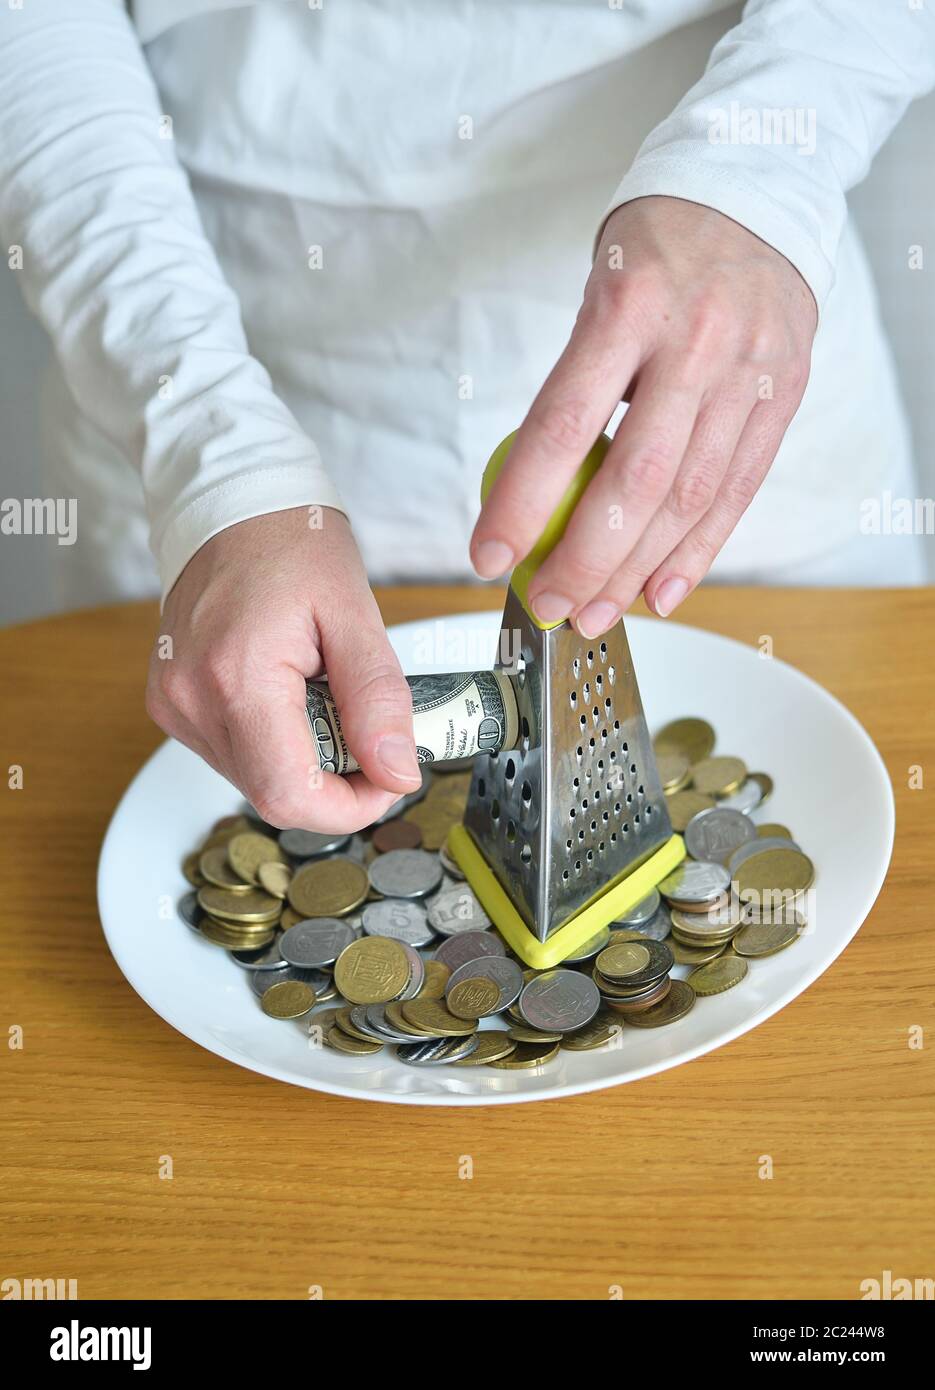 exchange dollars for cents using a grater Stock Photo